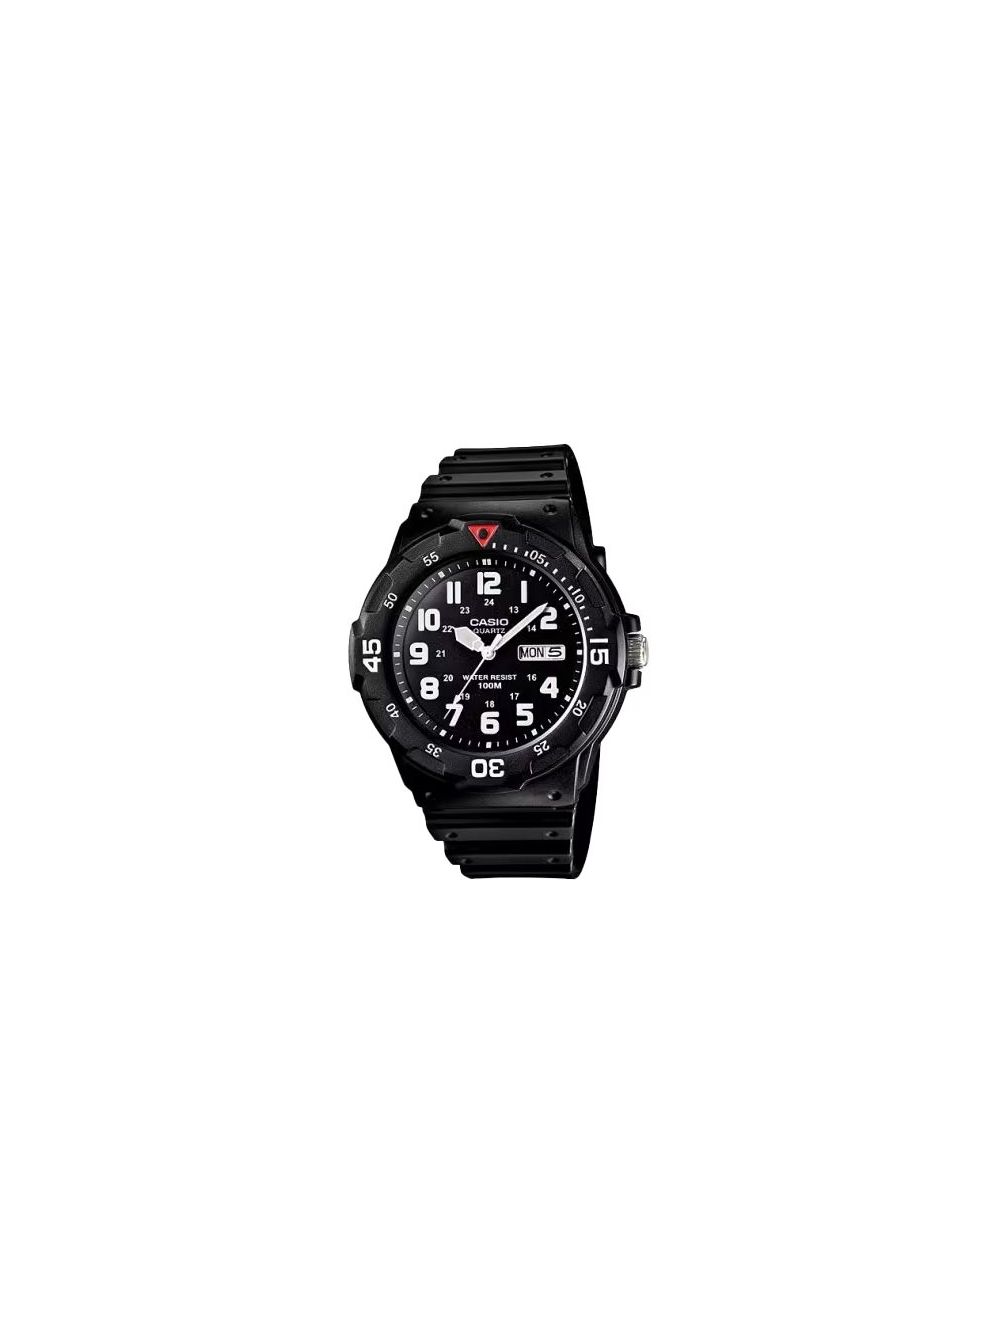 Classic Dive Style Resin Analog Watch